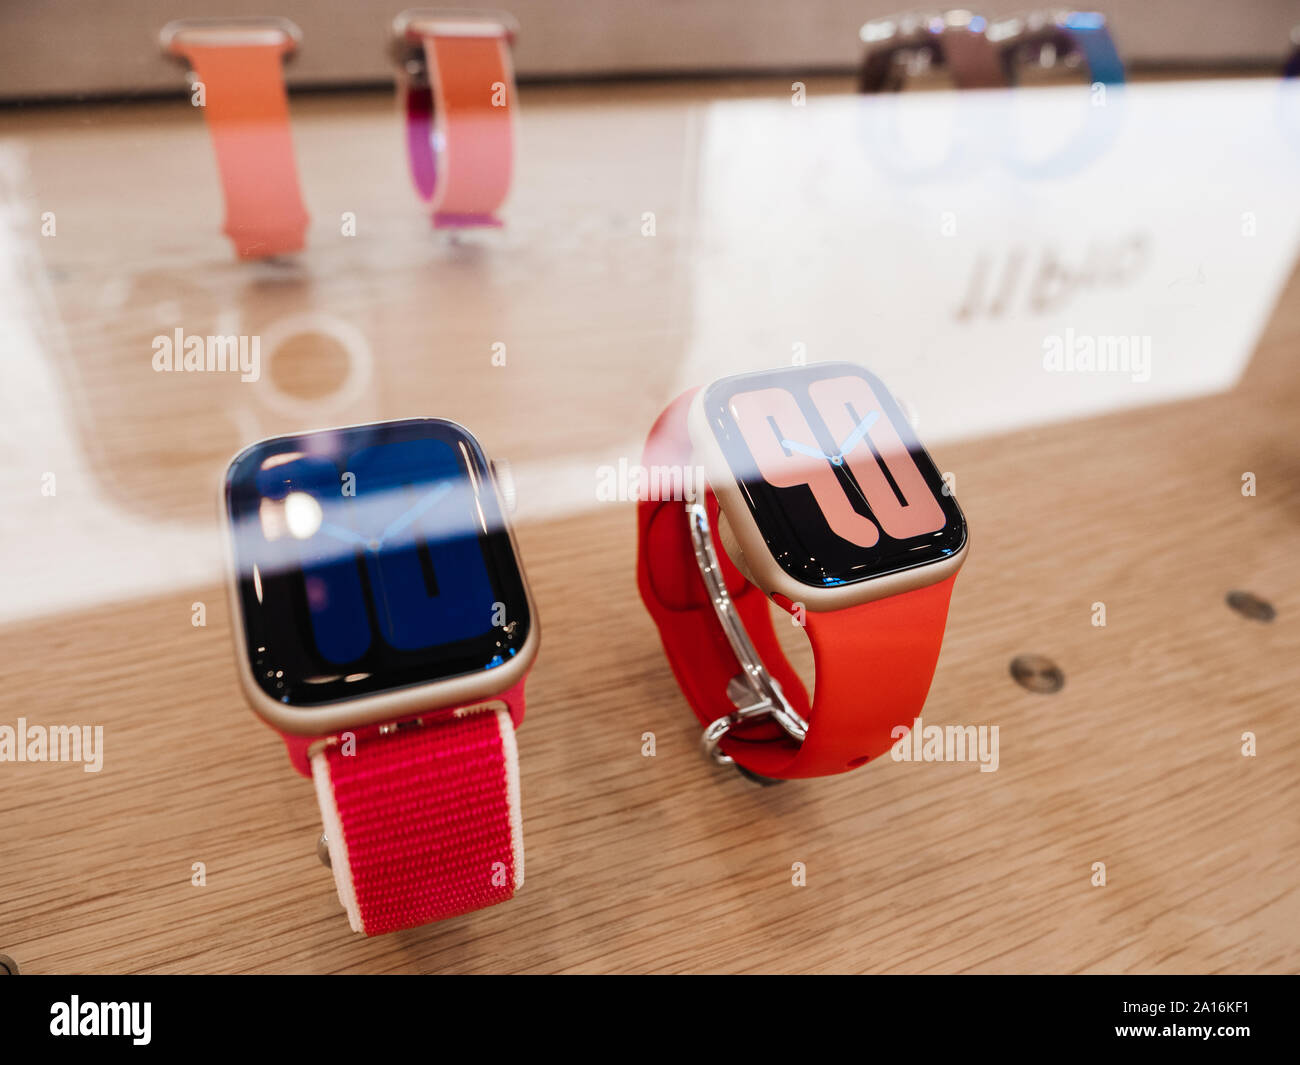 Page 2 - Apple Nike Watch High Resolution Stock Photography and Images -  Alamy